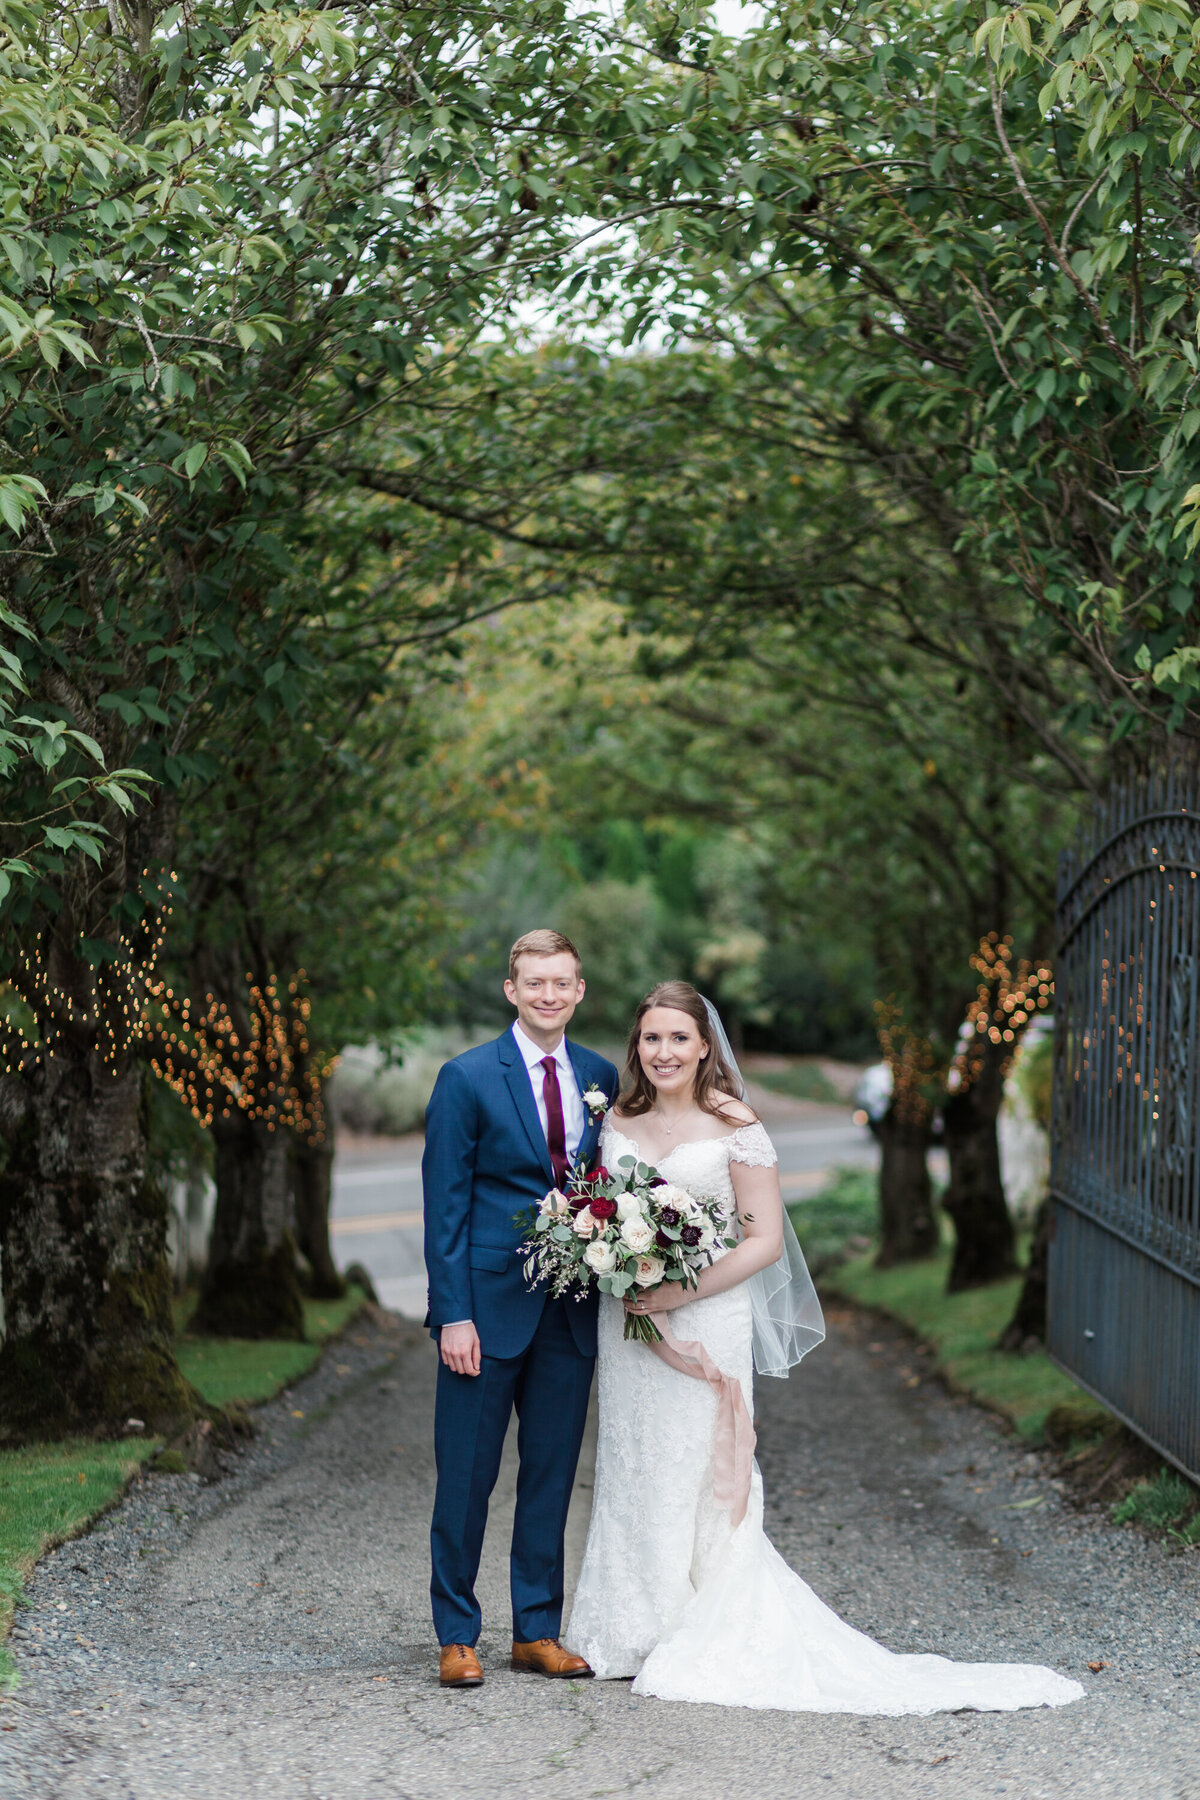 chateau lill woodinville bride and groom wedding photos by Joanna Monger Photography